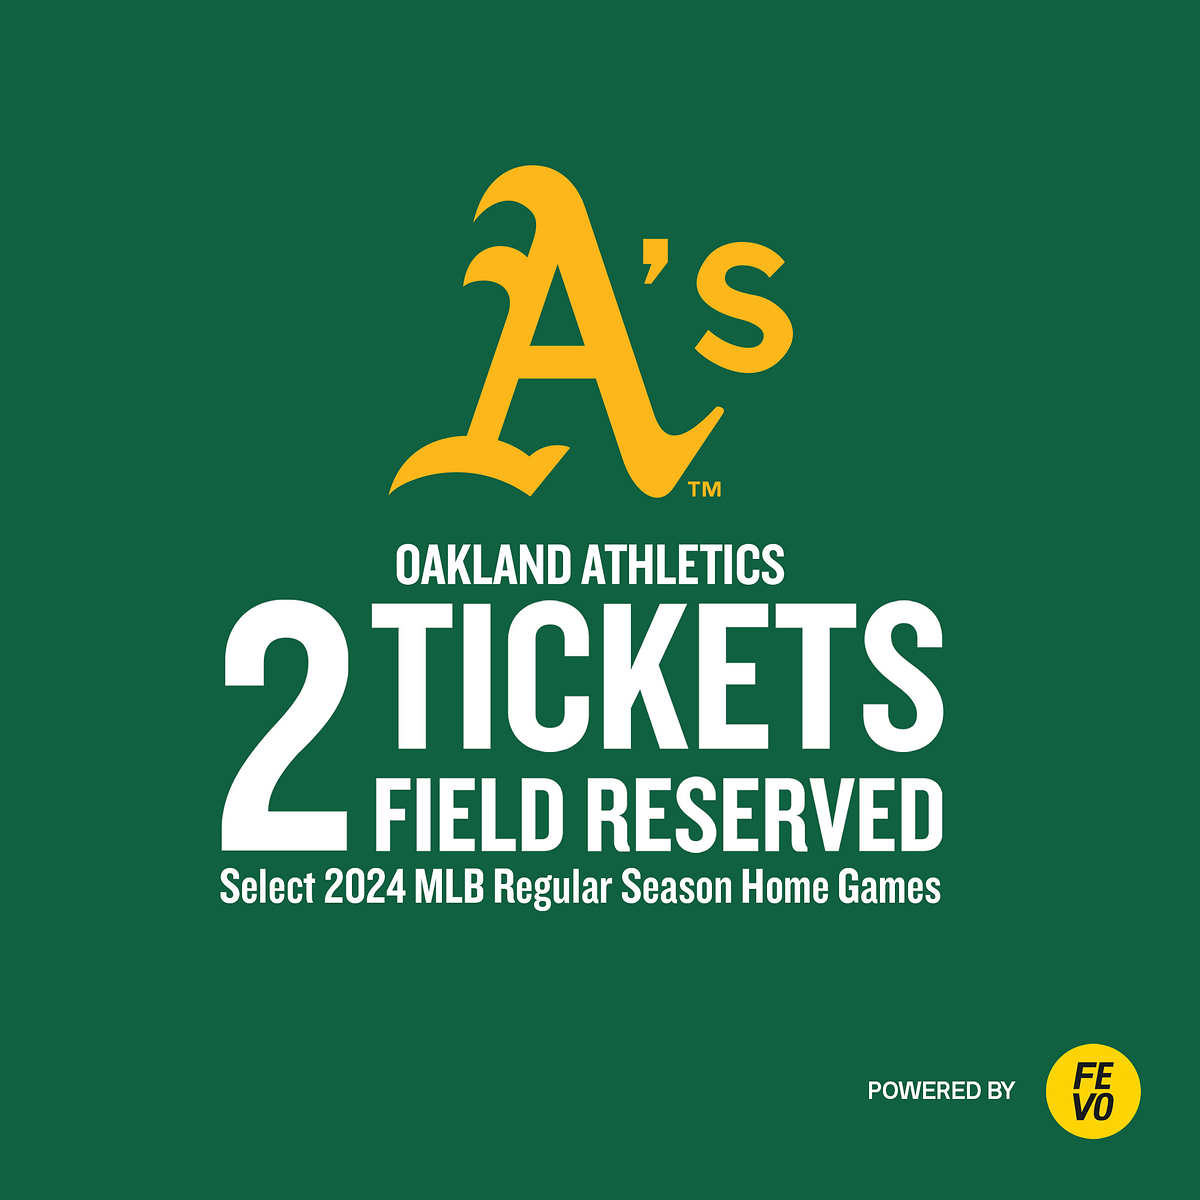 MLB - Oakland Athletics: Two Field Reserved Tickets, eVoucher